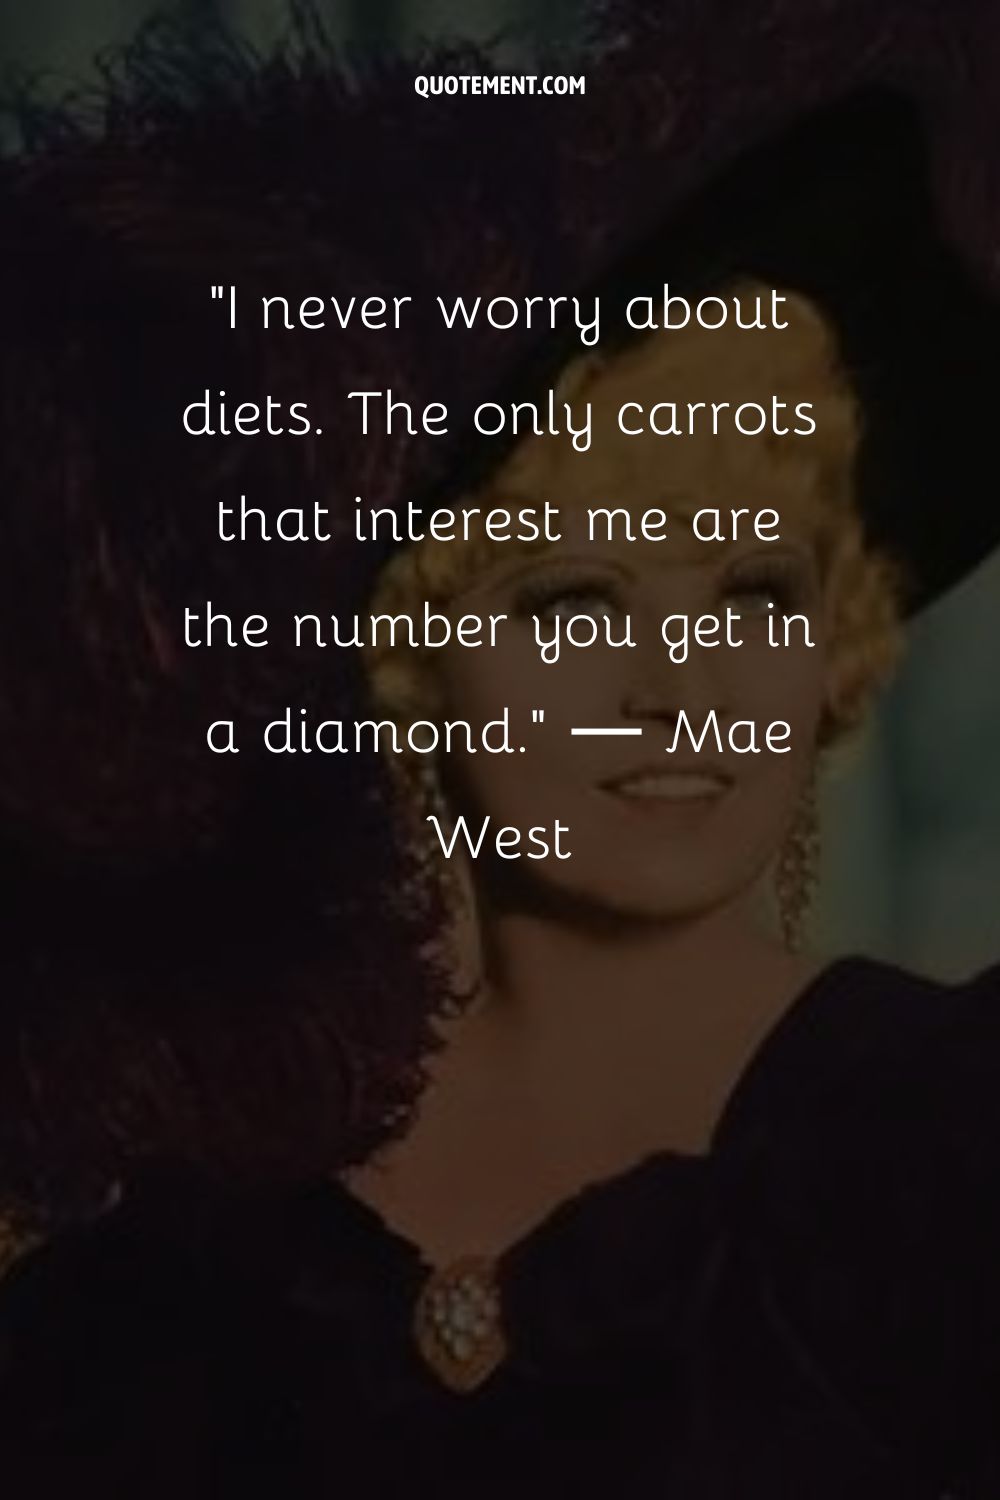 I never worry about diets. The only carrots that interest me are the number you get in a diamond.